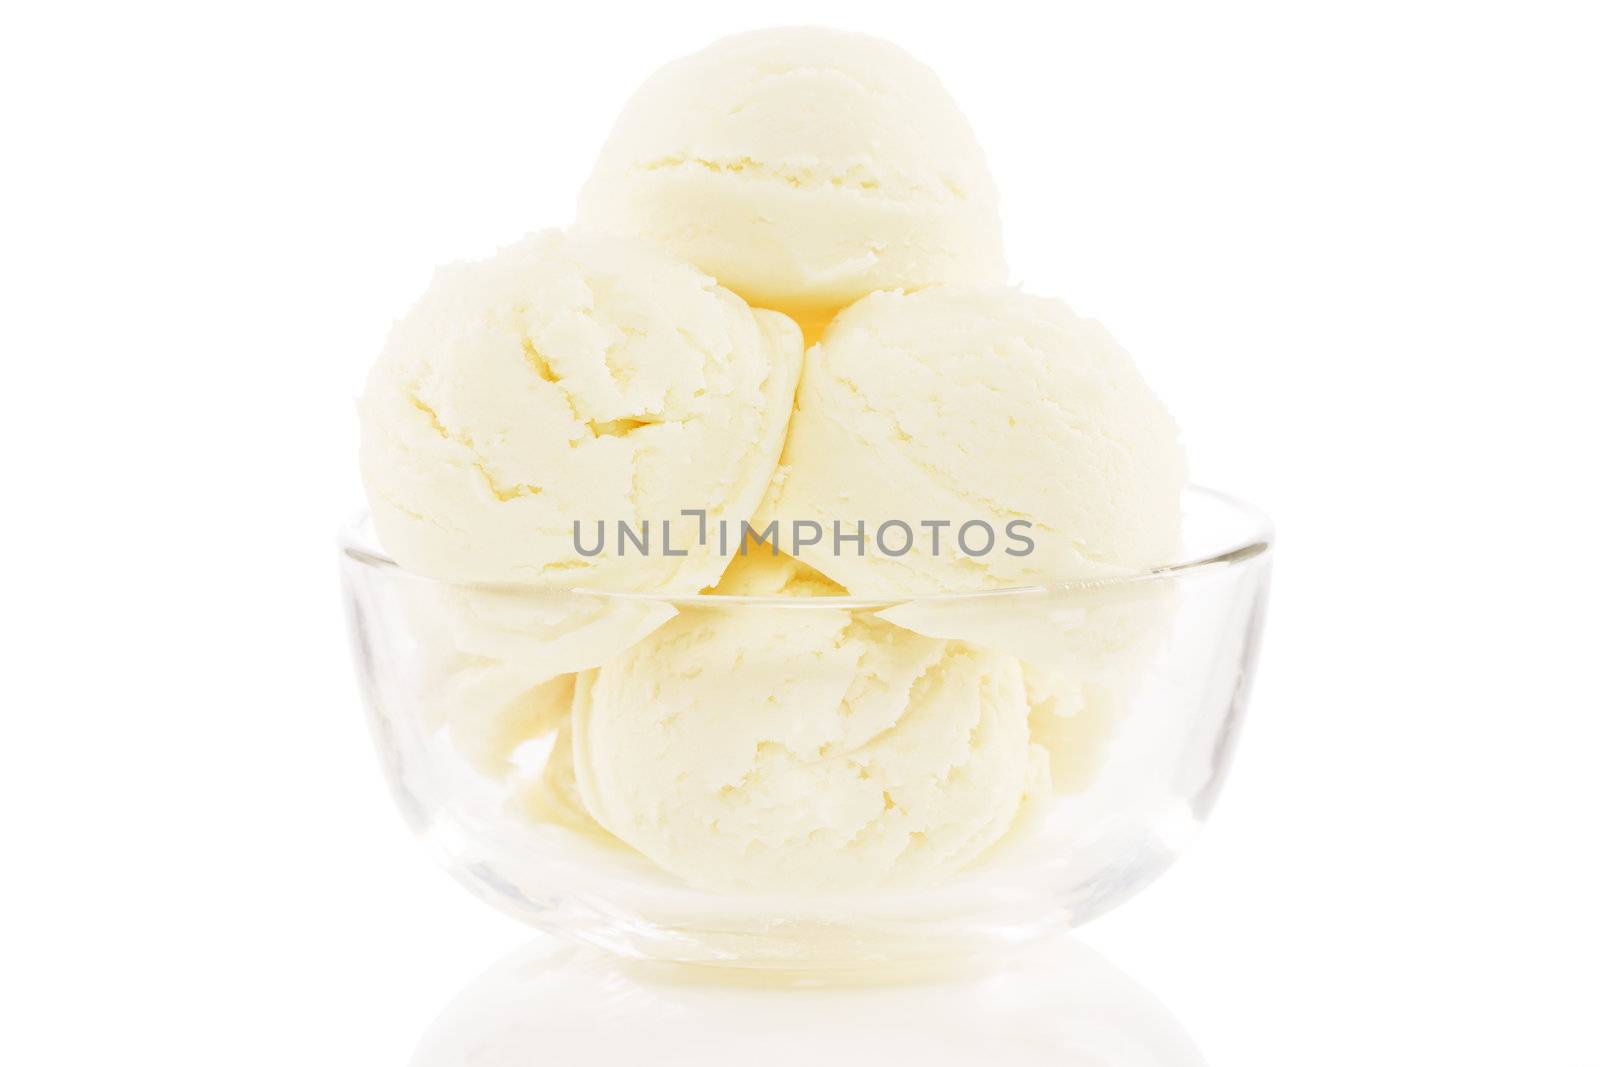 glass bowl filled with ice cream balls on white background